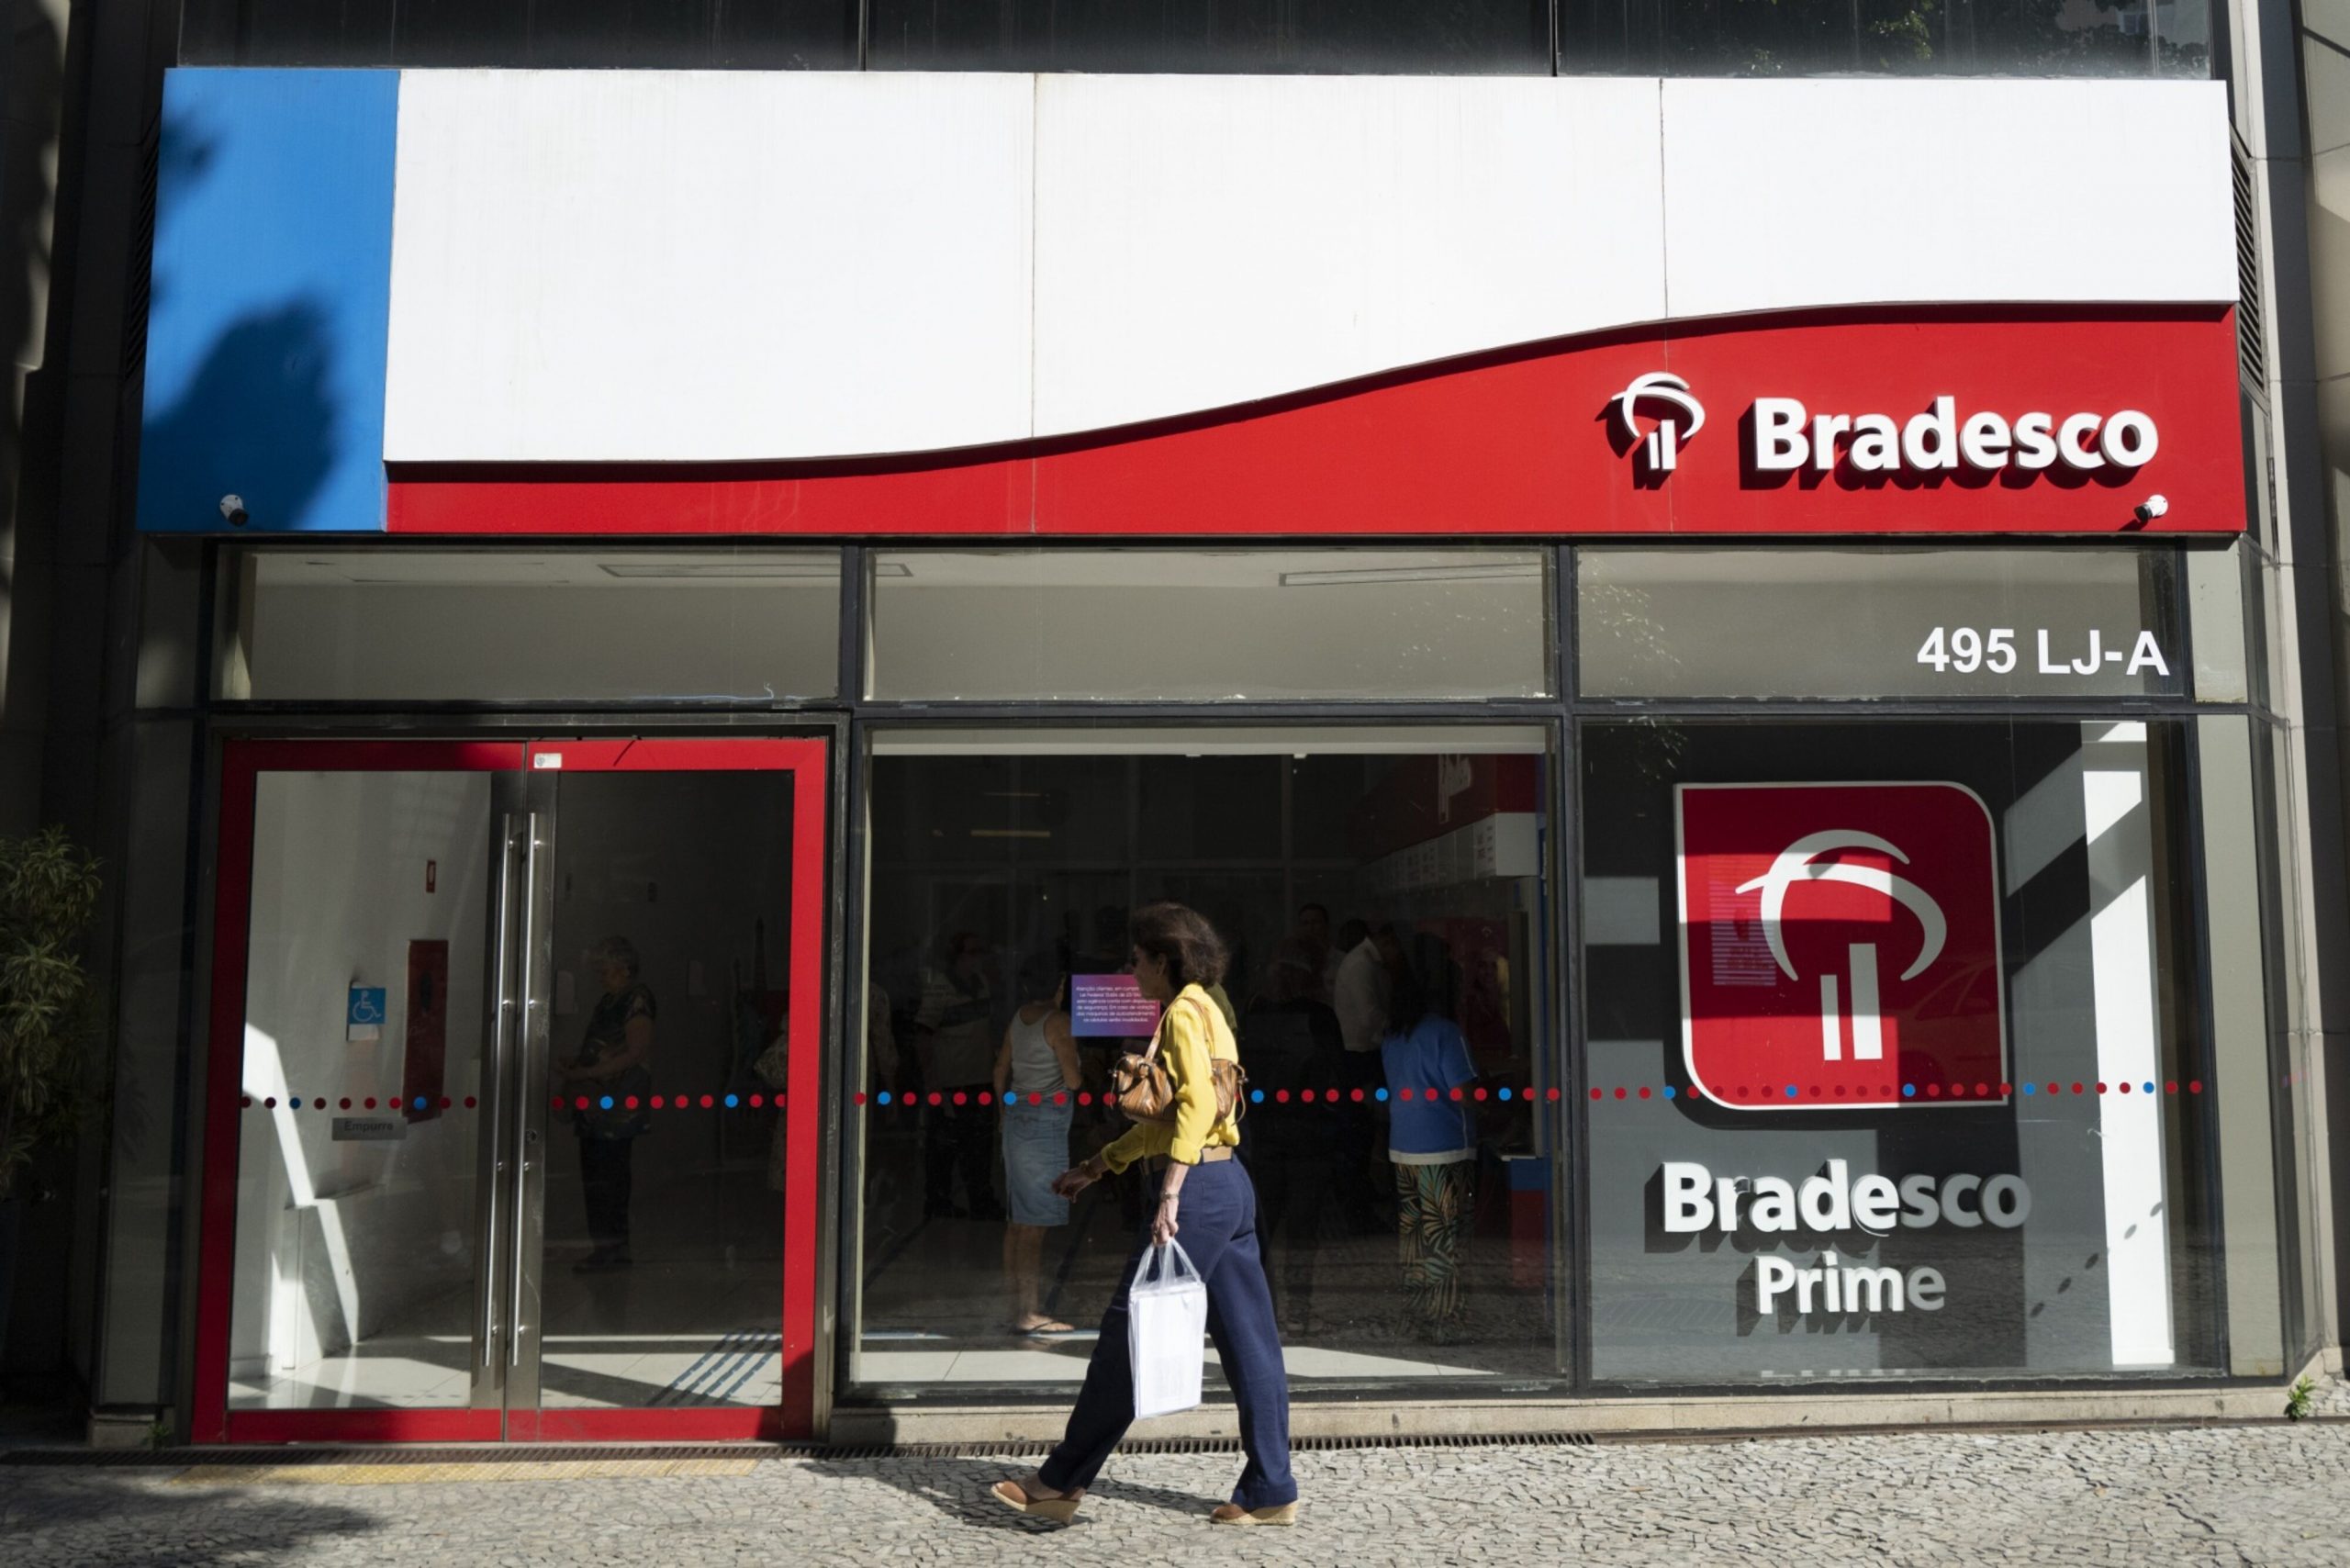 Bradesco Options Imply Subdued Post-Earnings Volatility